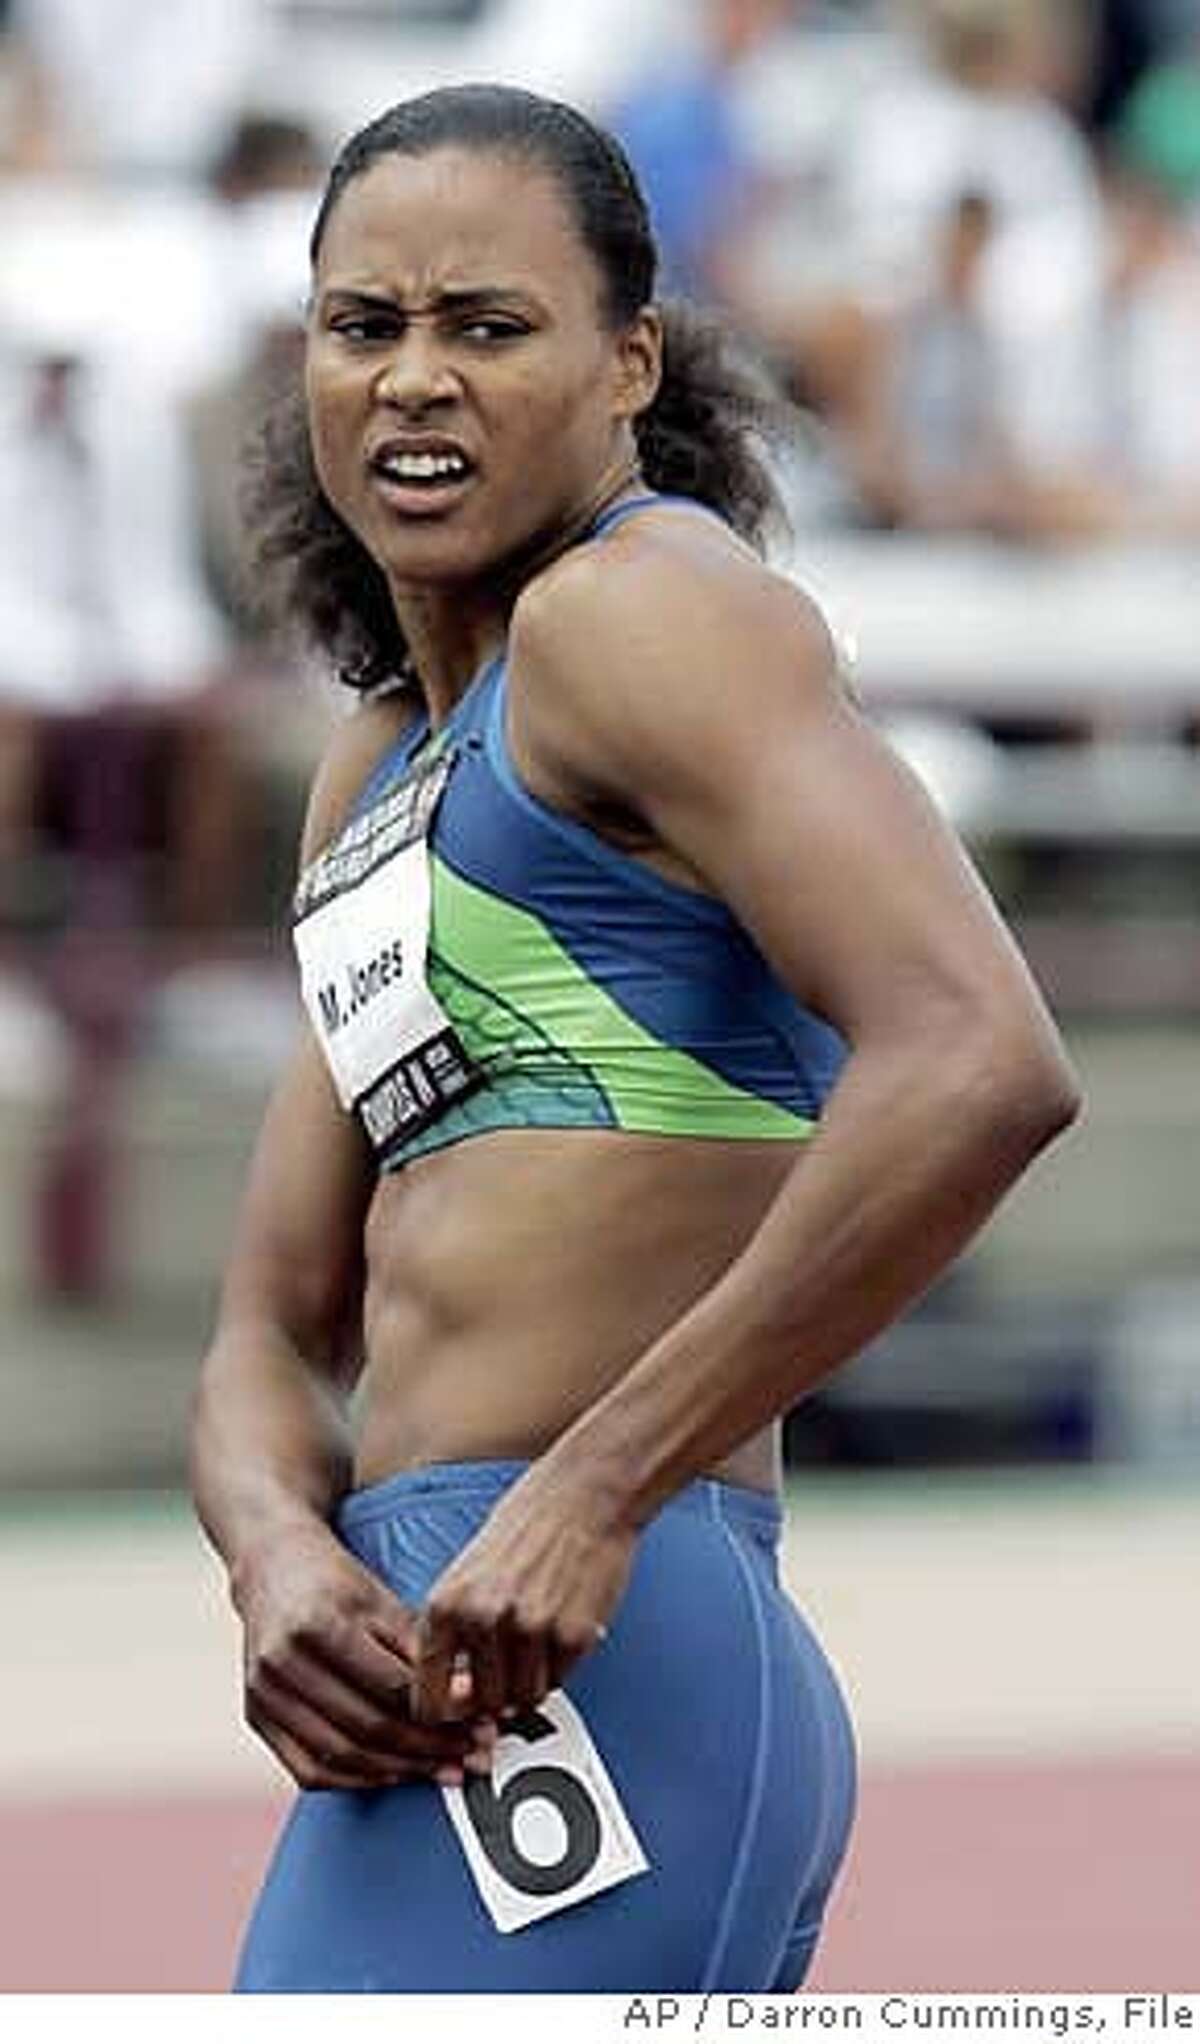 Marion Jones takes a look at her time of 11.17 in the prelims of the women's 100 meter run during the U.S. Outdoor Track & Filed Championships in Indianapolis, Friday, June 23, 2006. (AP Photo/Darron Cummings)